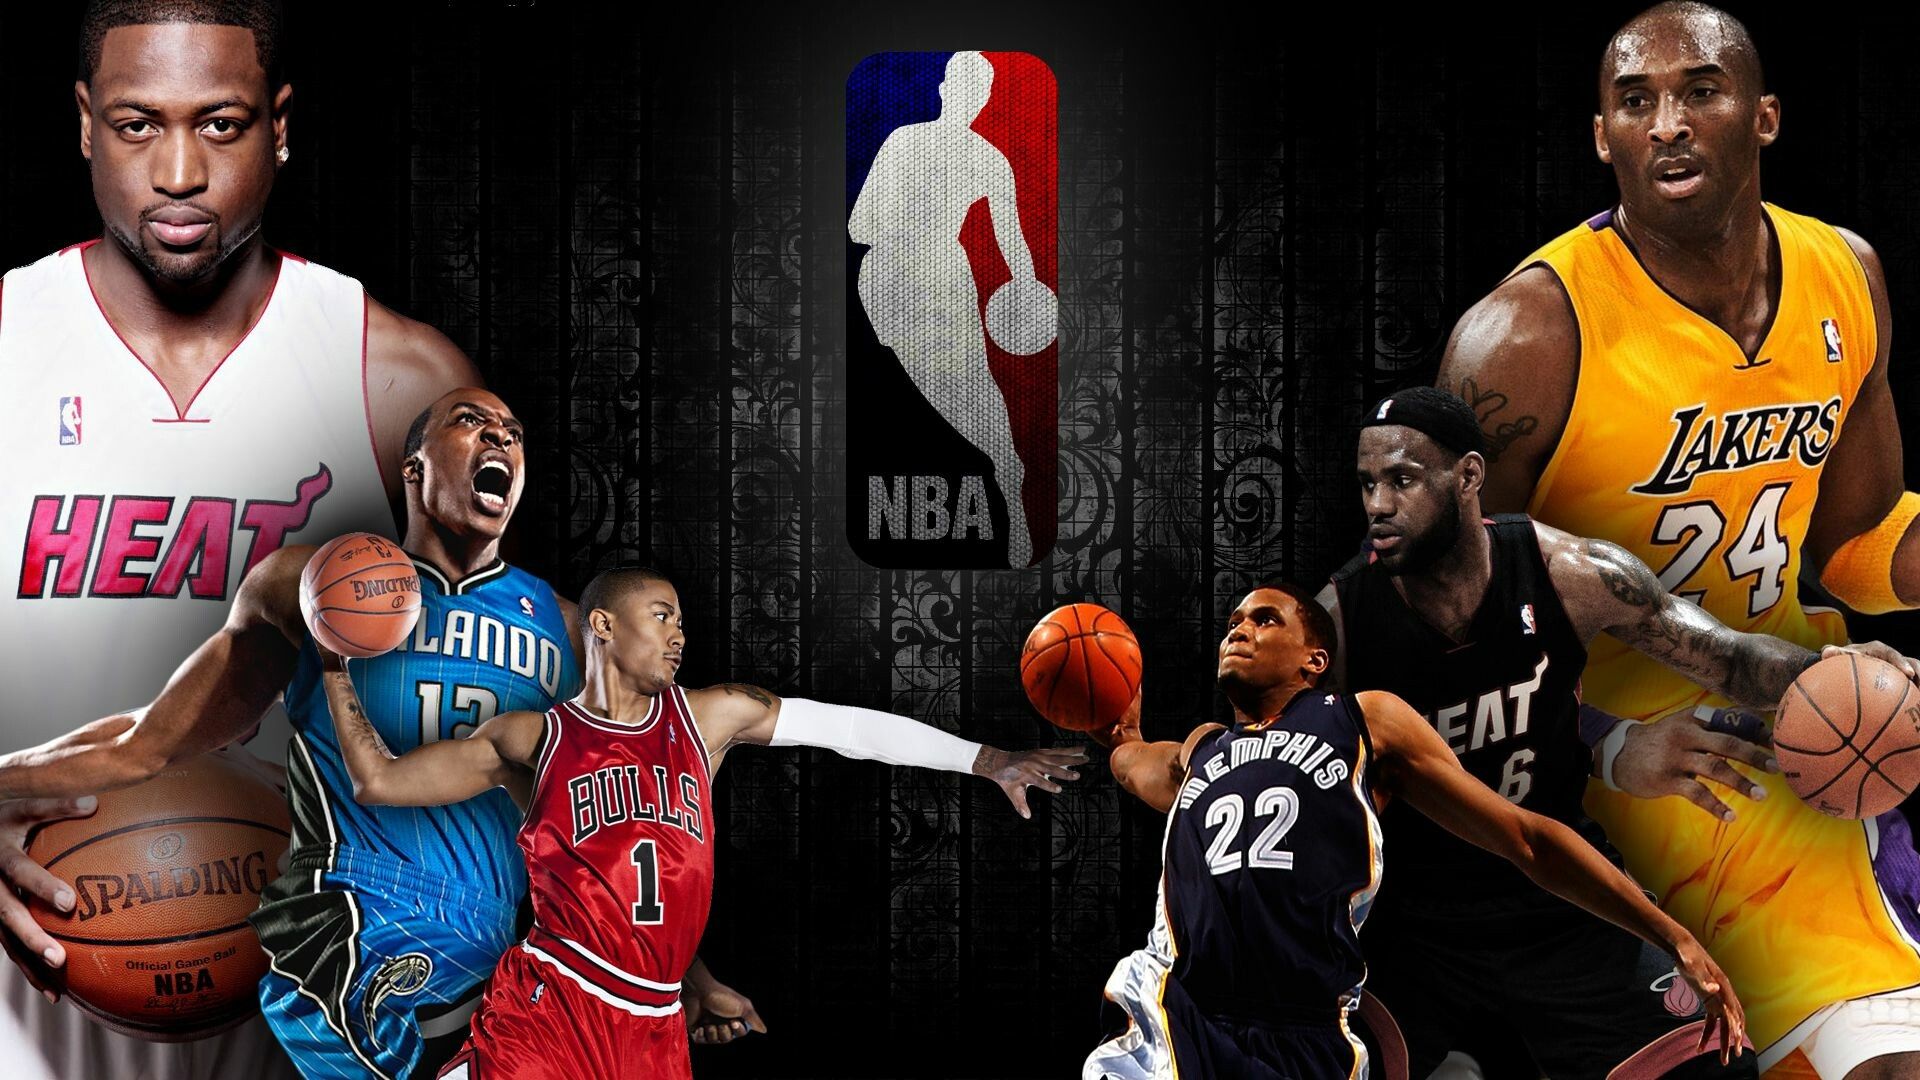 4K NBA Wallpaper: HD, 4K, 5K for PC and Mobile. Download free image for iPhone, Android